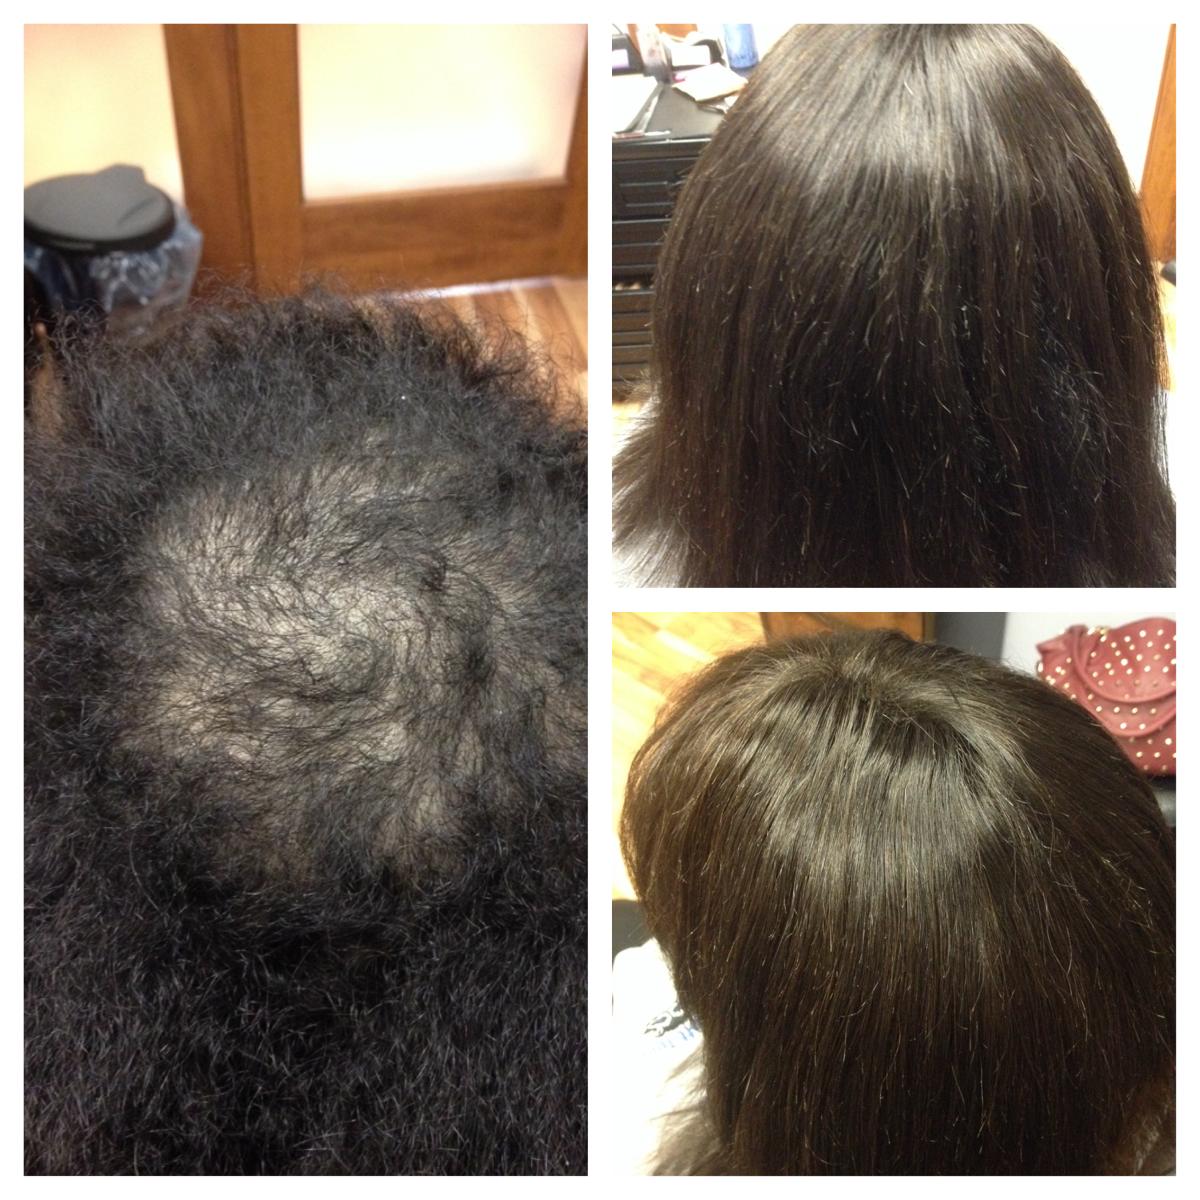 Hair systems, wigs and non-surgical hair loss solutions – LTS Hair Studio